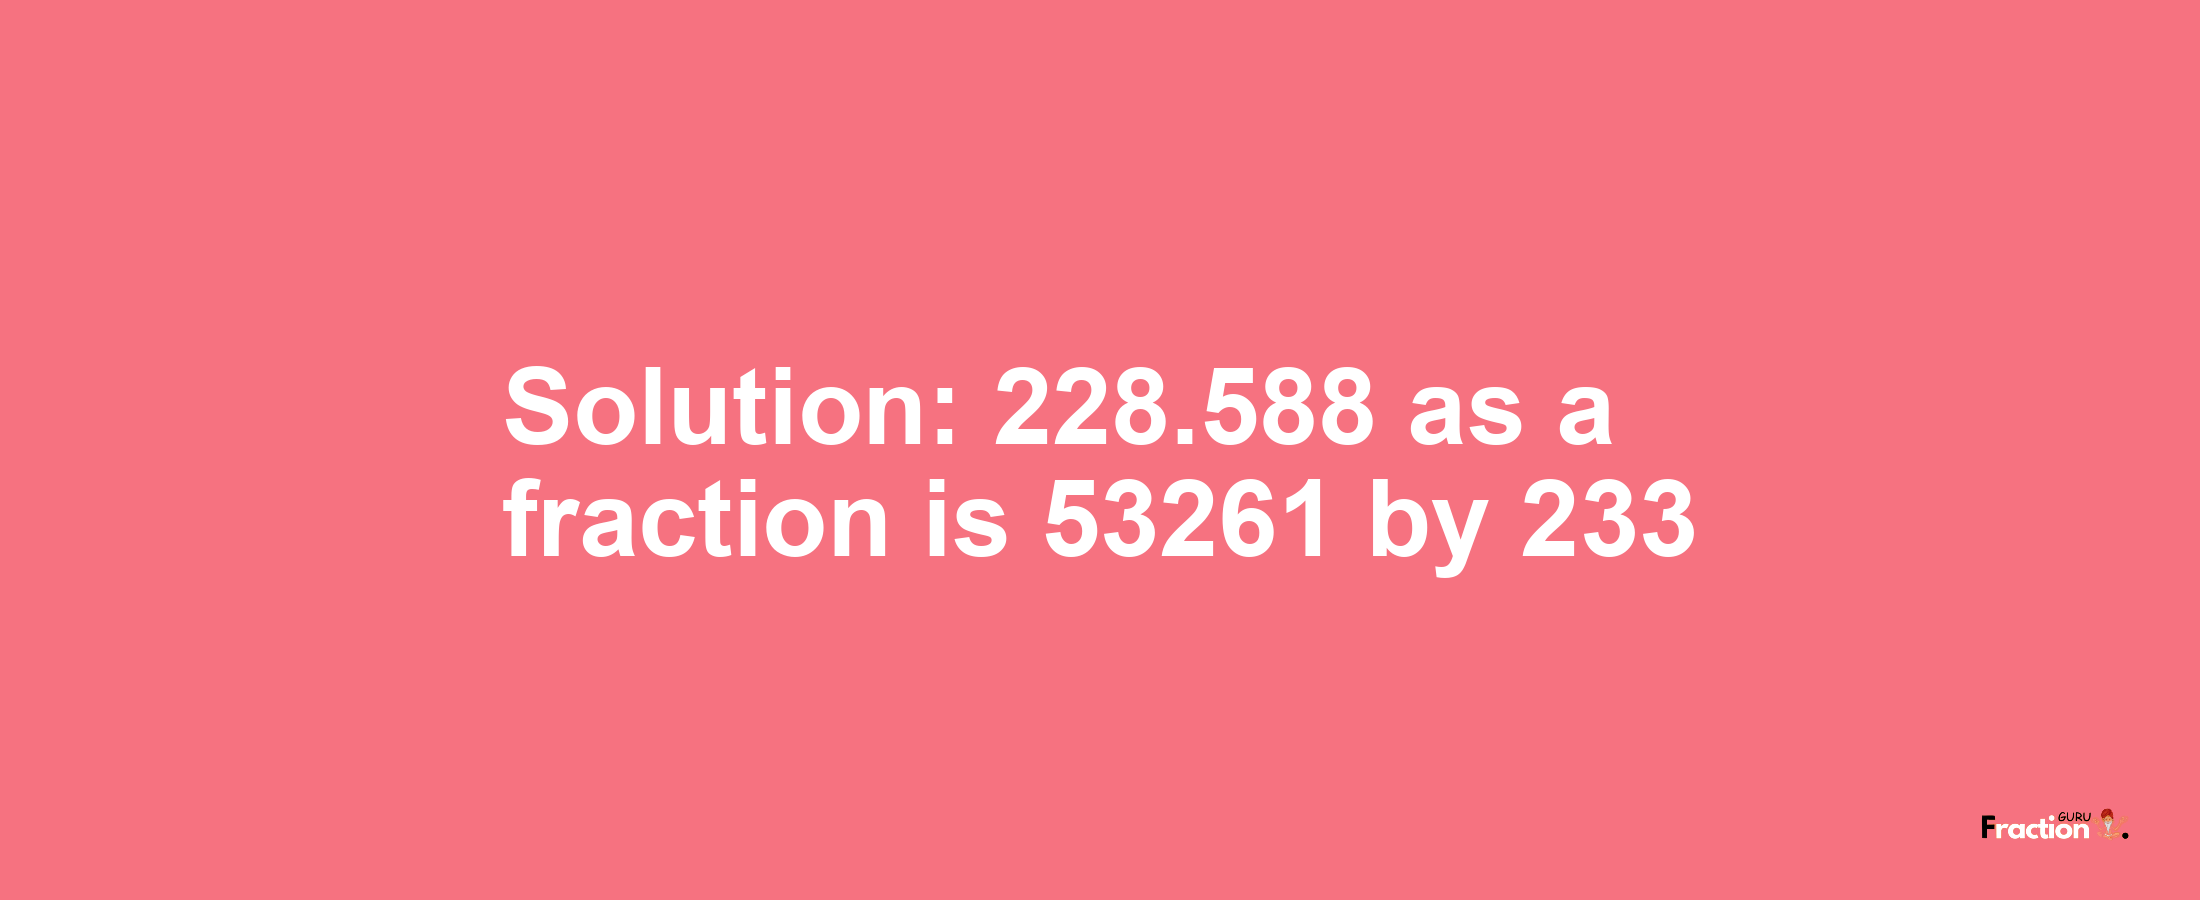 Solution:228.588 as a fraction is 53261/233